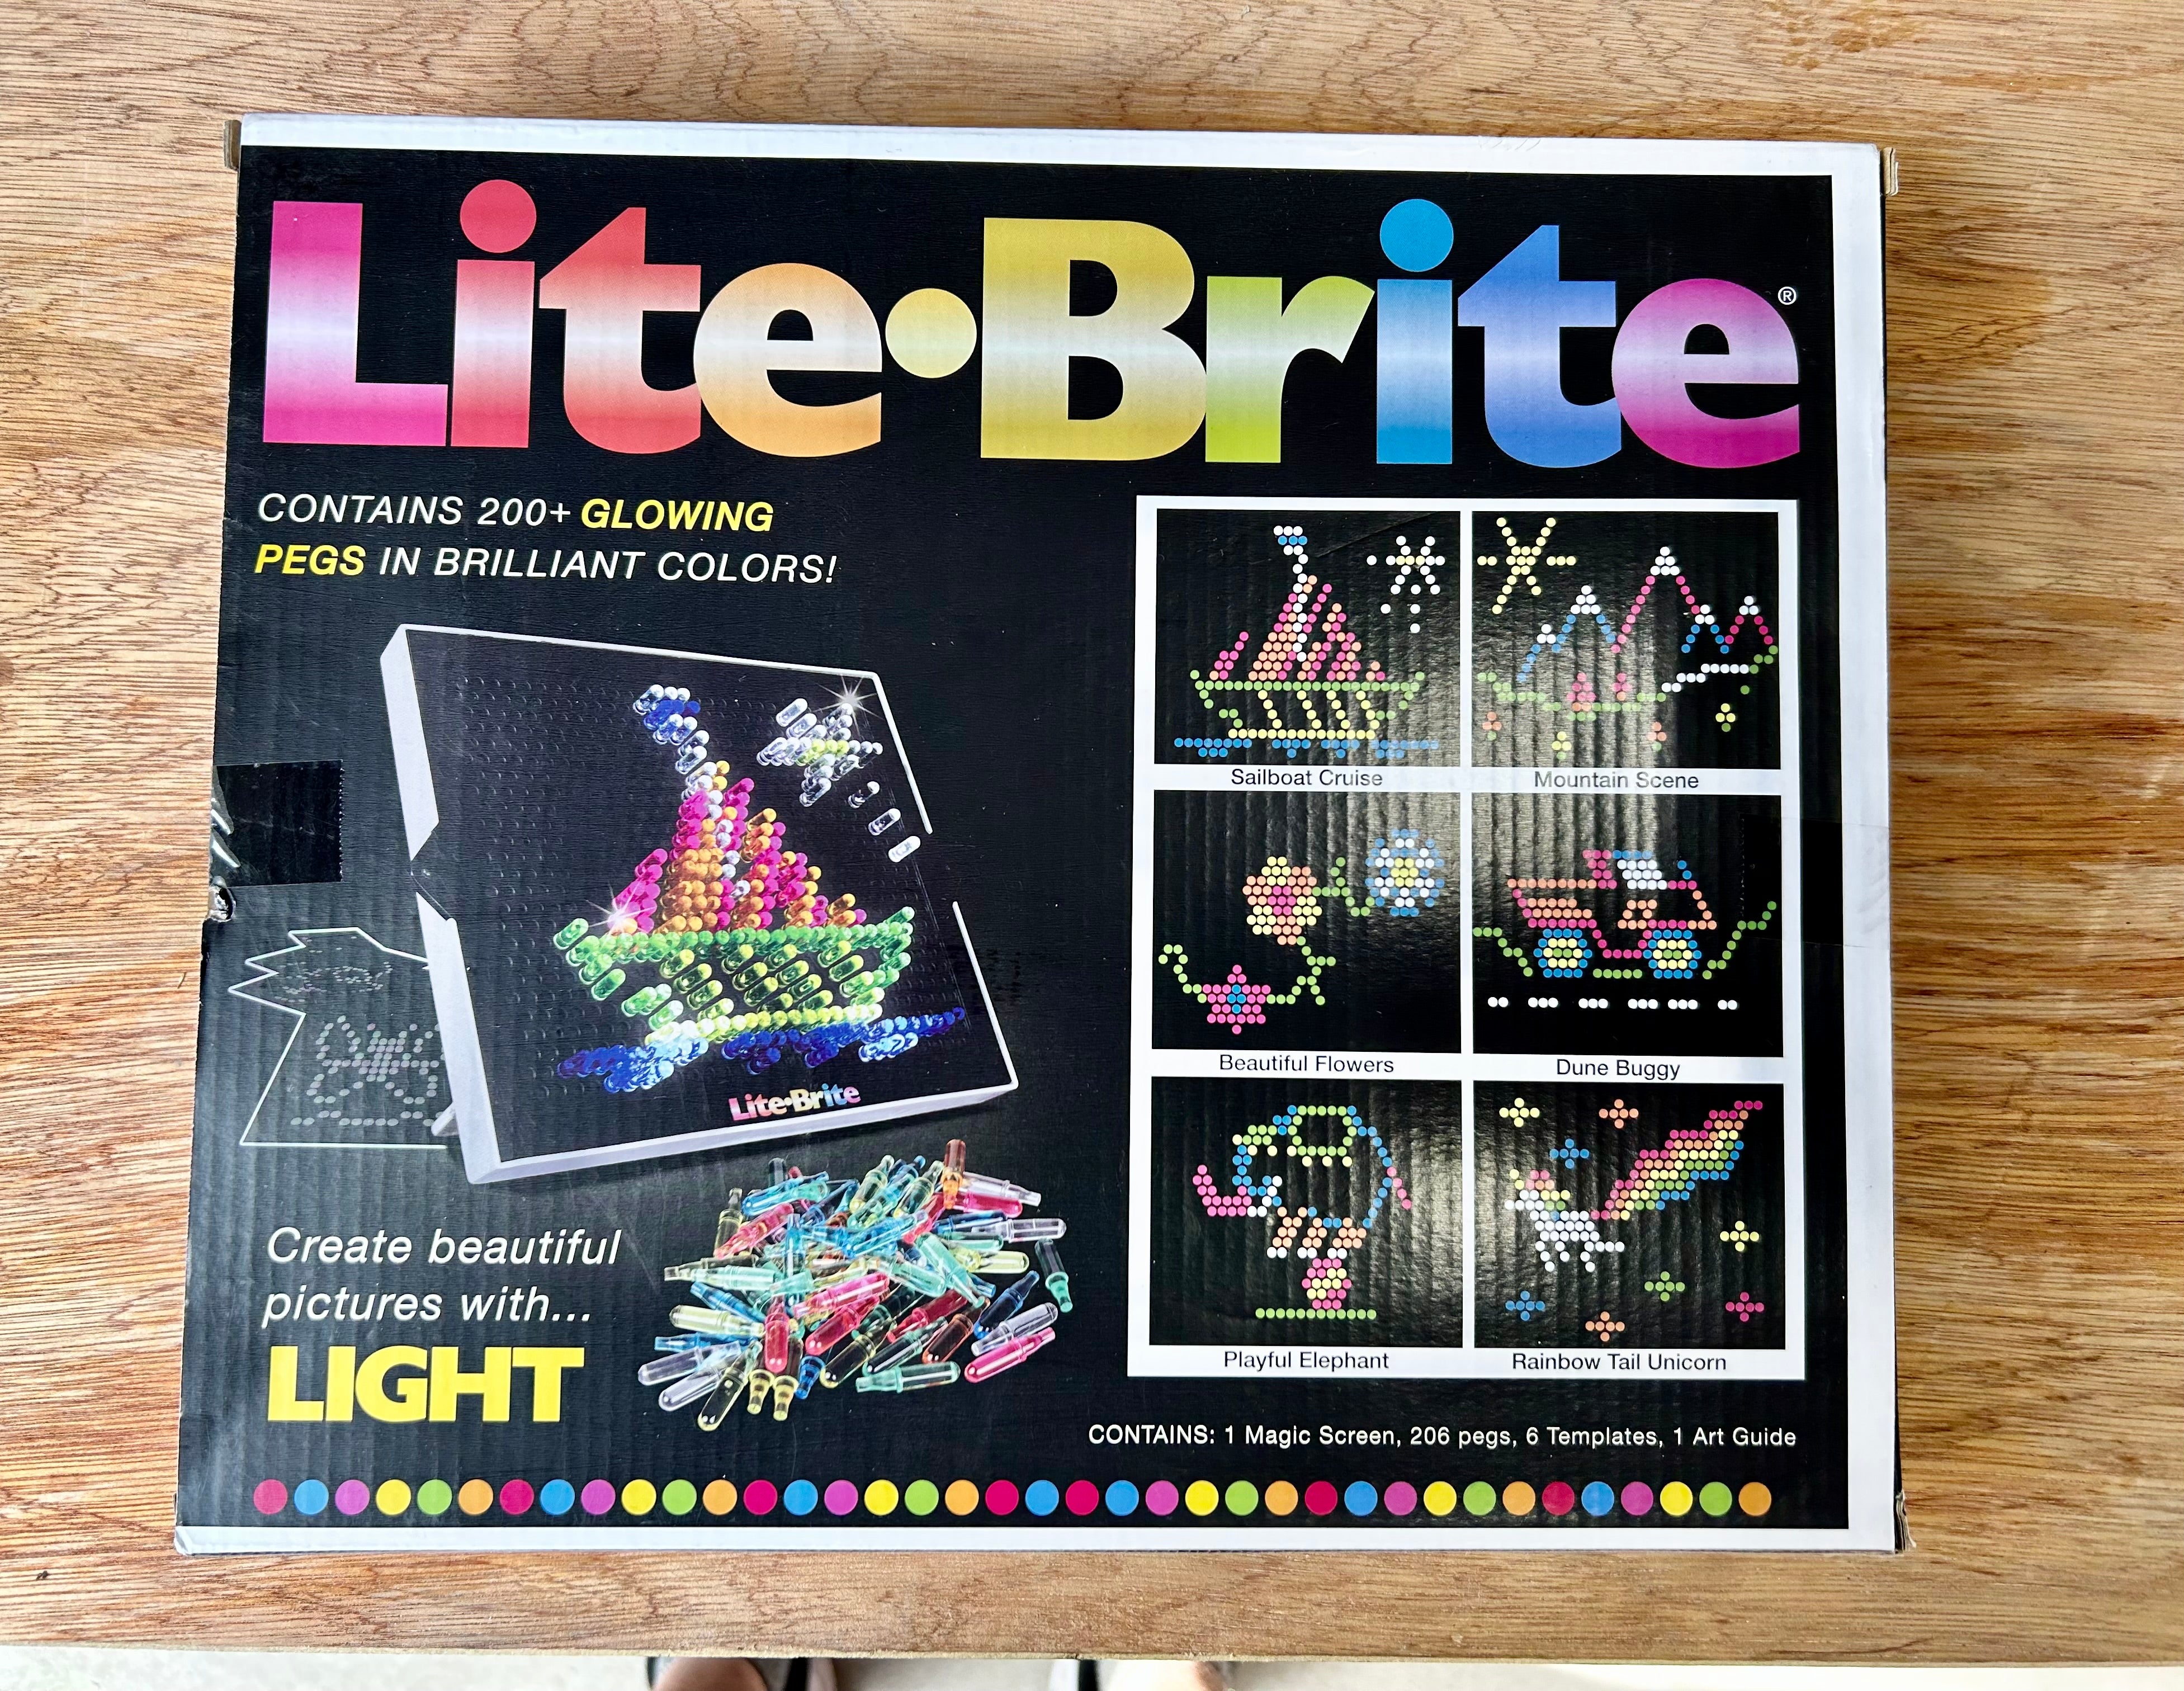 Lite-Brite, New and Improved Model of a Classic 80's Toy